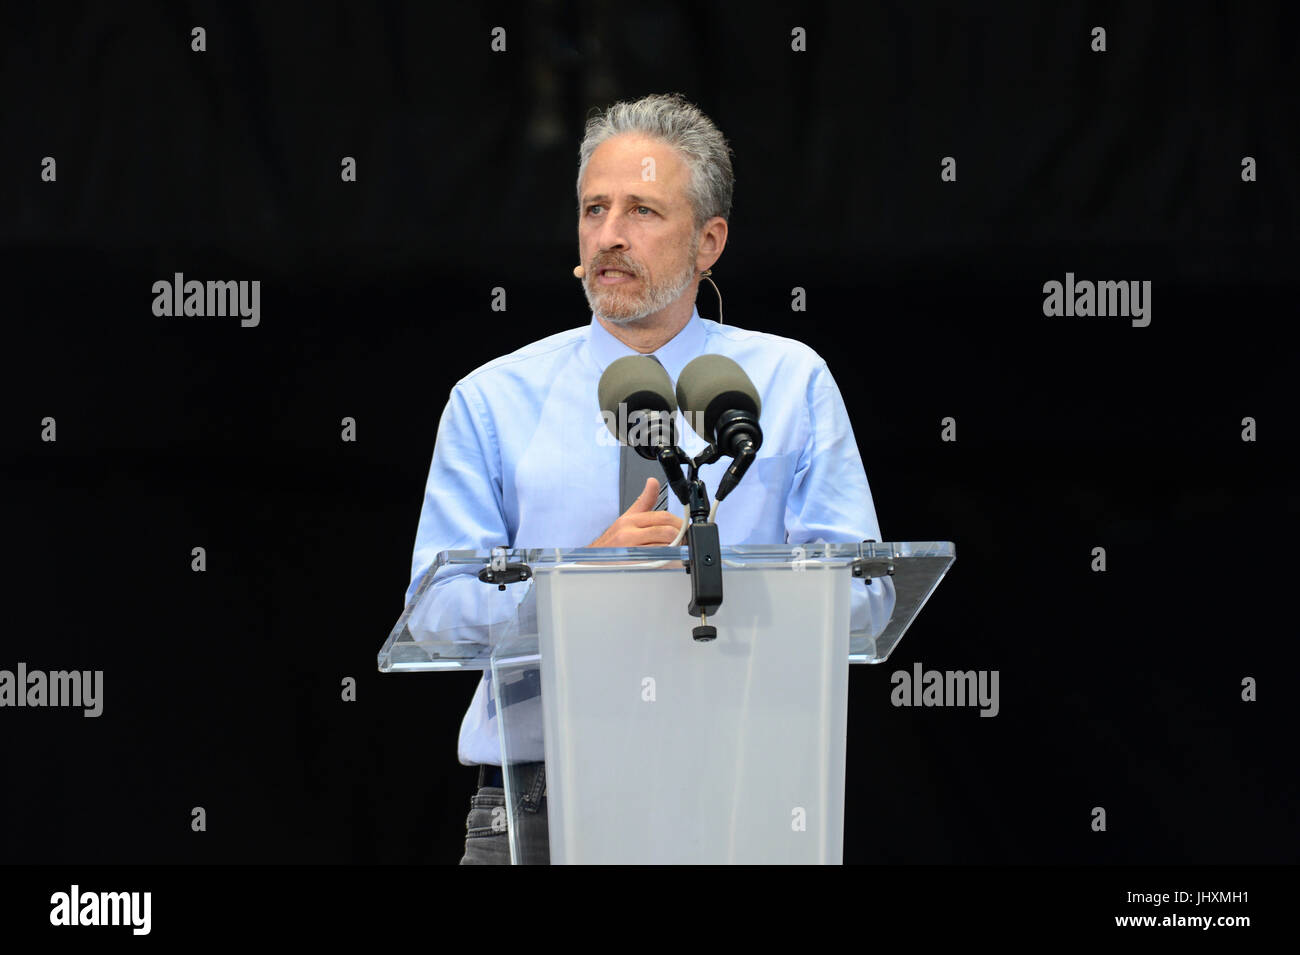 Television personality and comedian Jon Stewart speaks during the Department of Defense Warrior Games opening ceremony at Soldier Field July 1, 2017 in Chicago, Illinois. Stock Photo